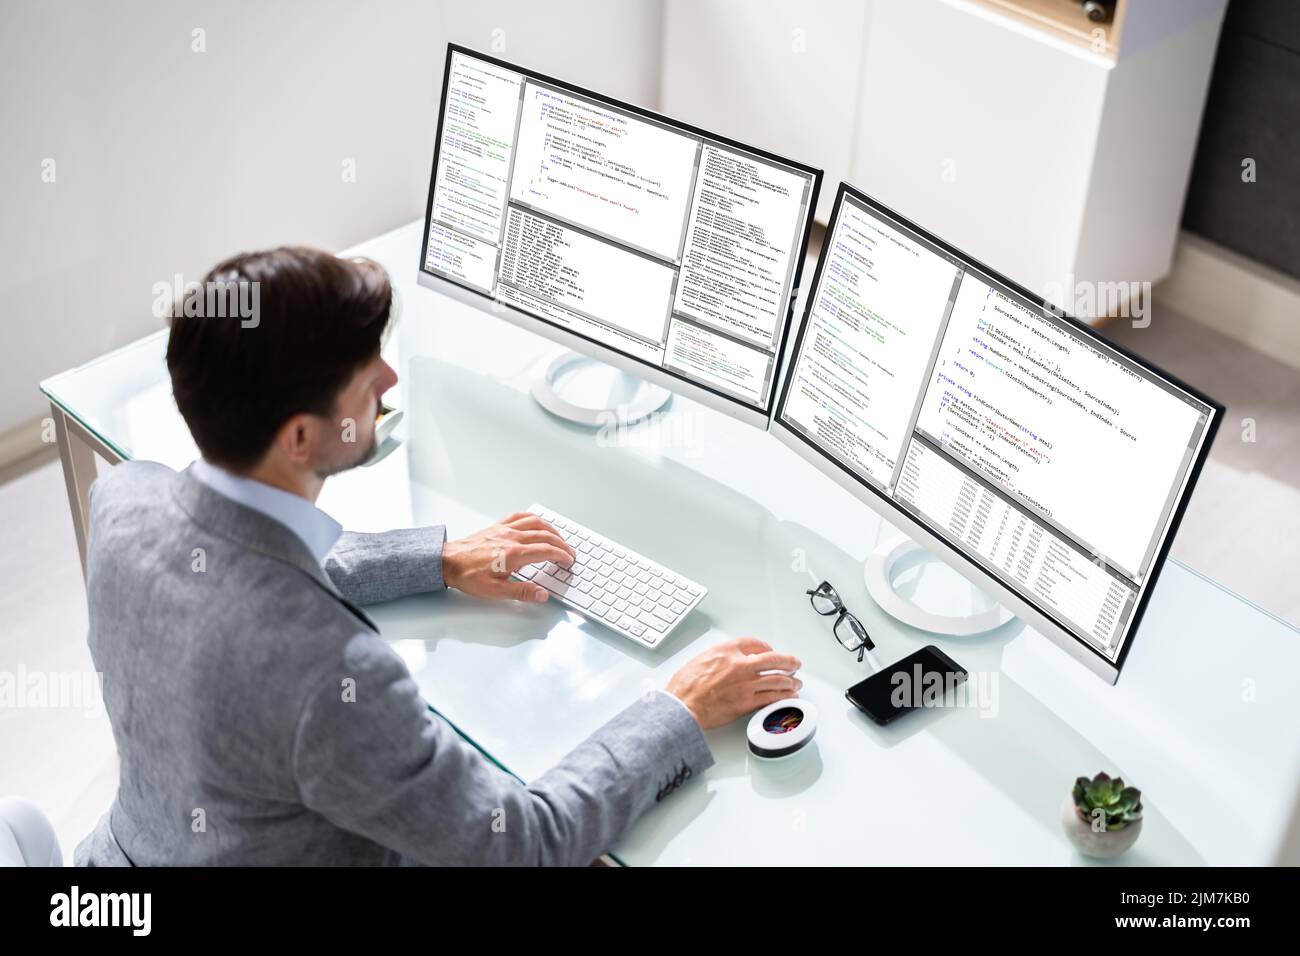 Work From Home On Multiple Computer Screen Stock Photo